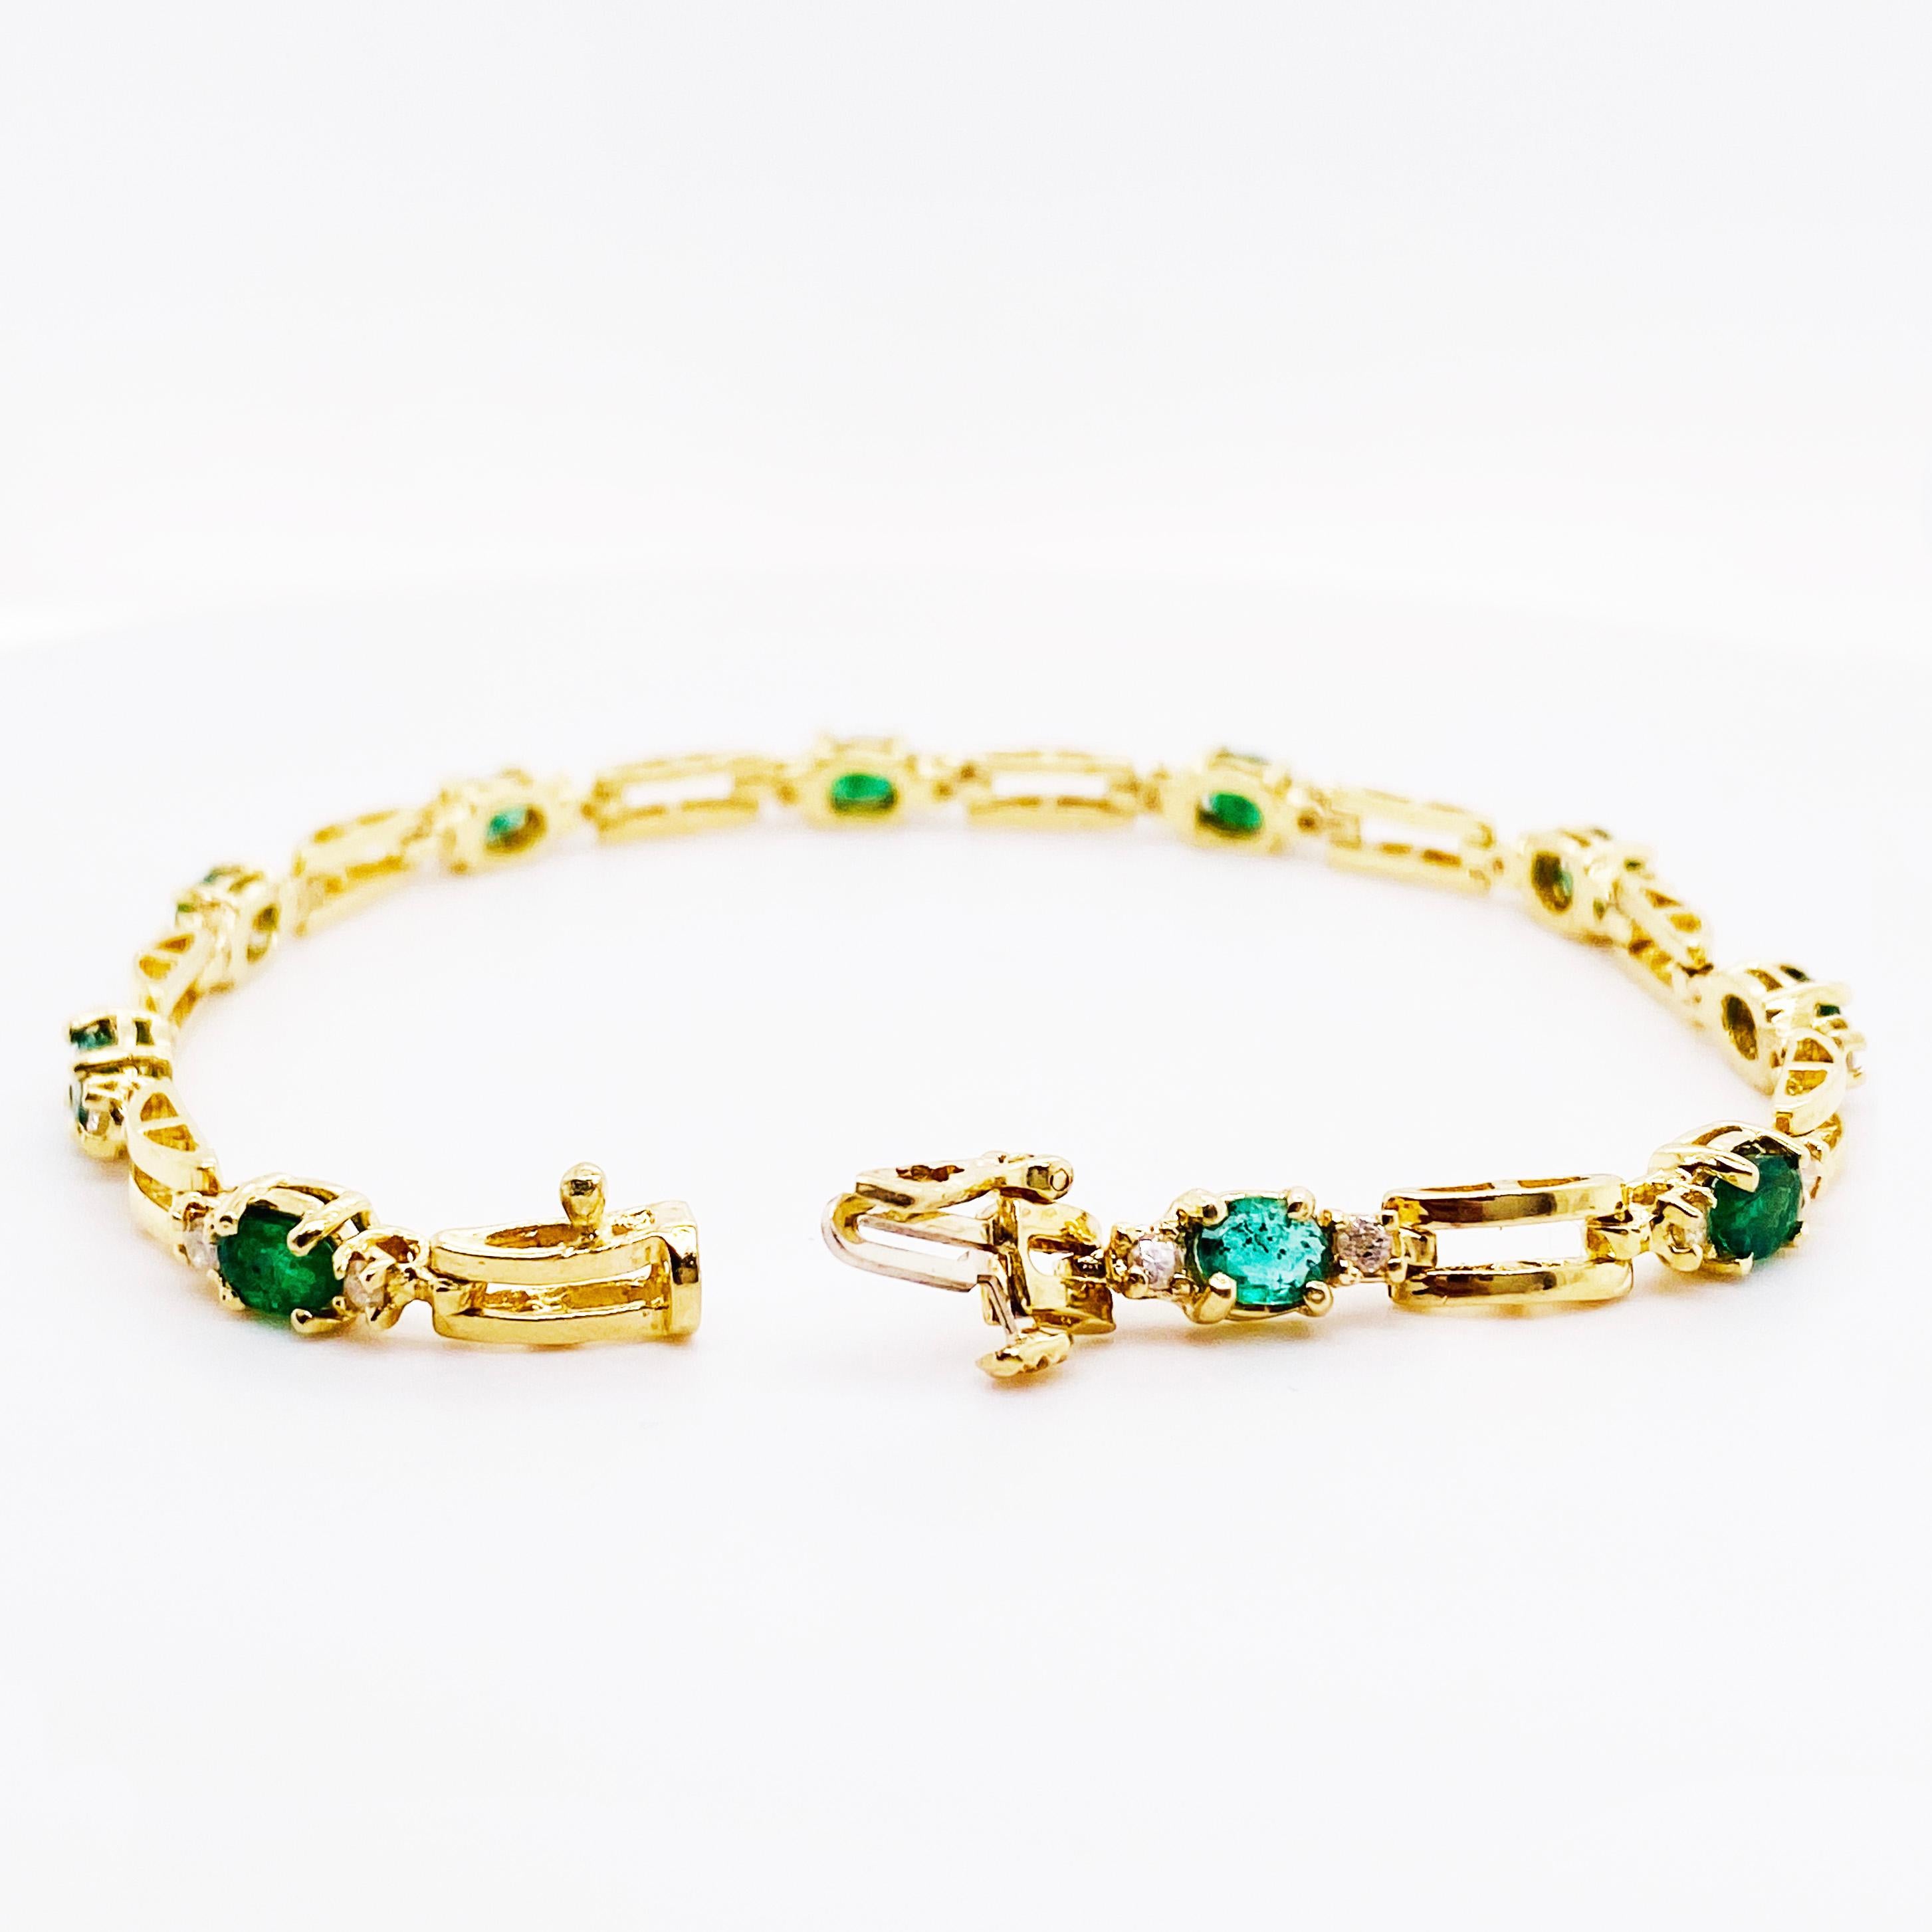 10 Emeralds flanked by a diamond on either side tennis bracelet. The bracelet is very elegant and stylish and looks good on any wrist.  The bracelet is seven inches long and has a hidden box clasp with a safety latch.  The details are as